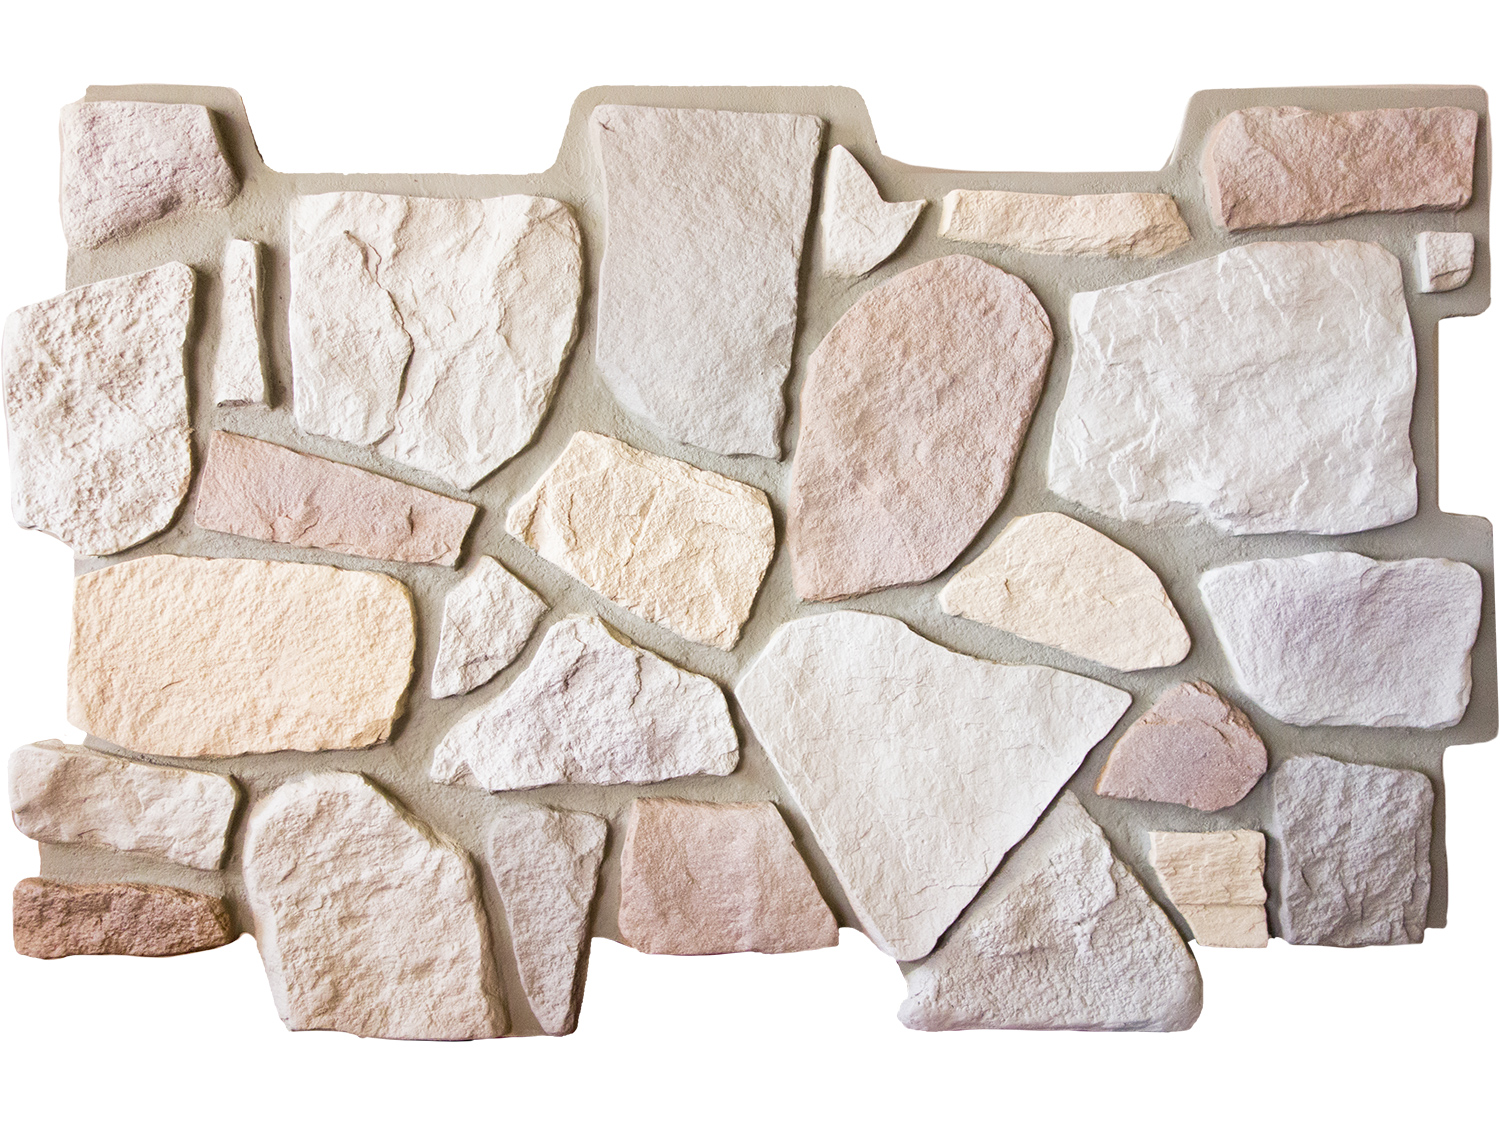 Are there corners available for Carlton Fieldstone?